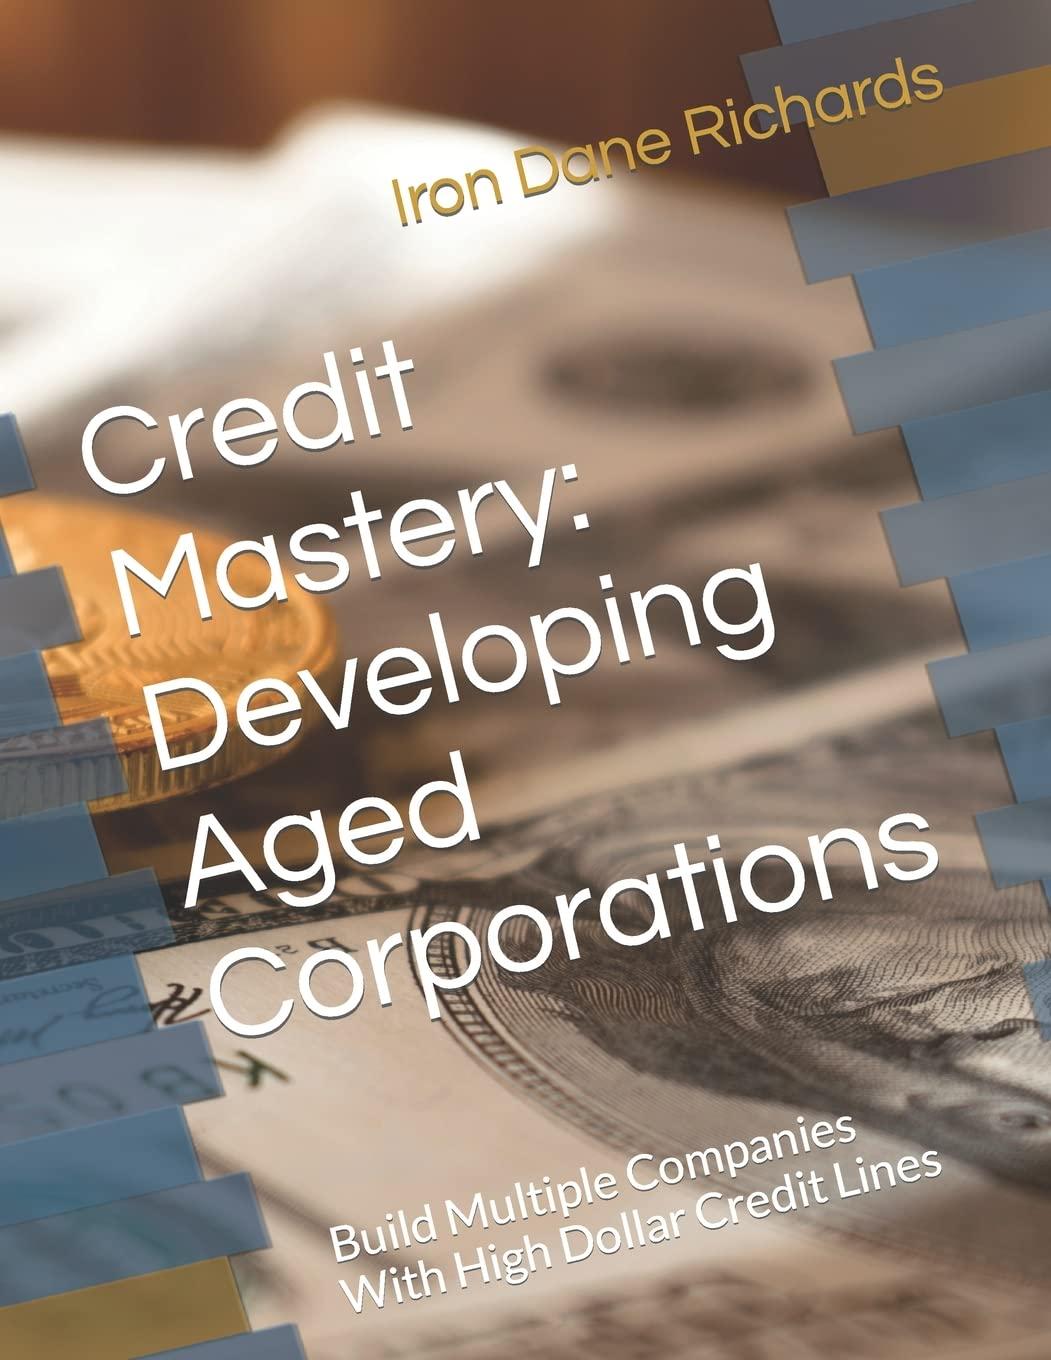 credit mastery developing aged corporations build multiple companies with high dollar credit lines 1st